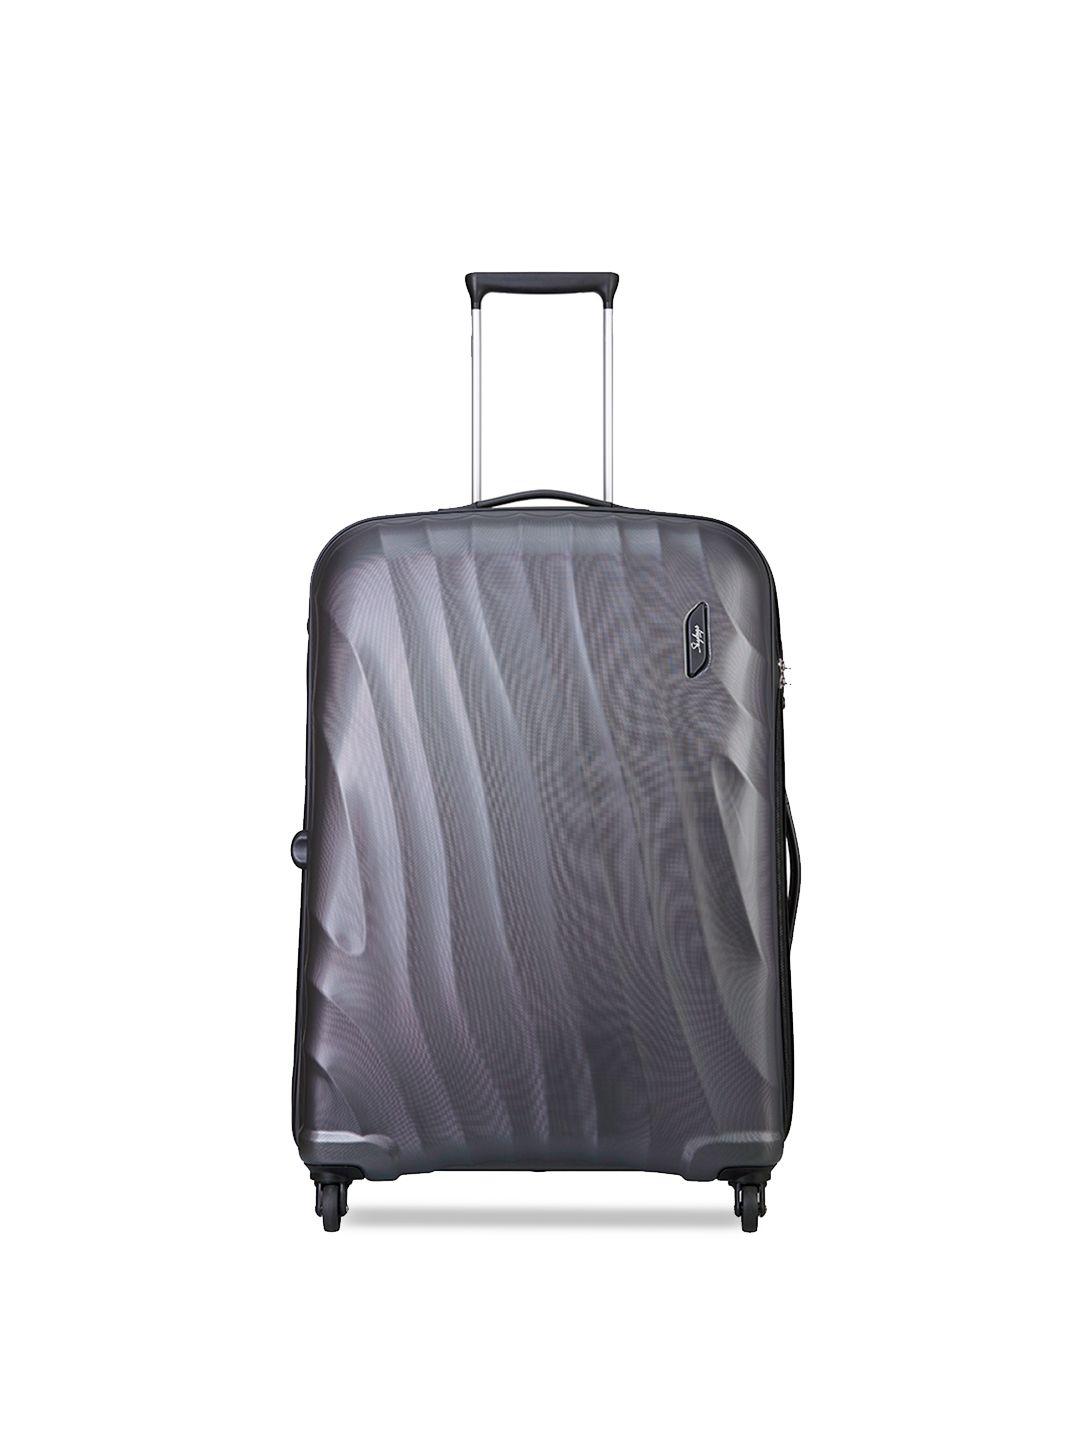 skybags unisex grey large trolley suitcase